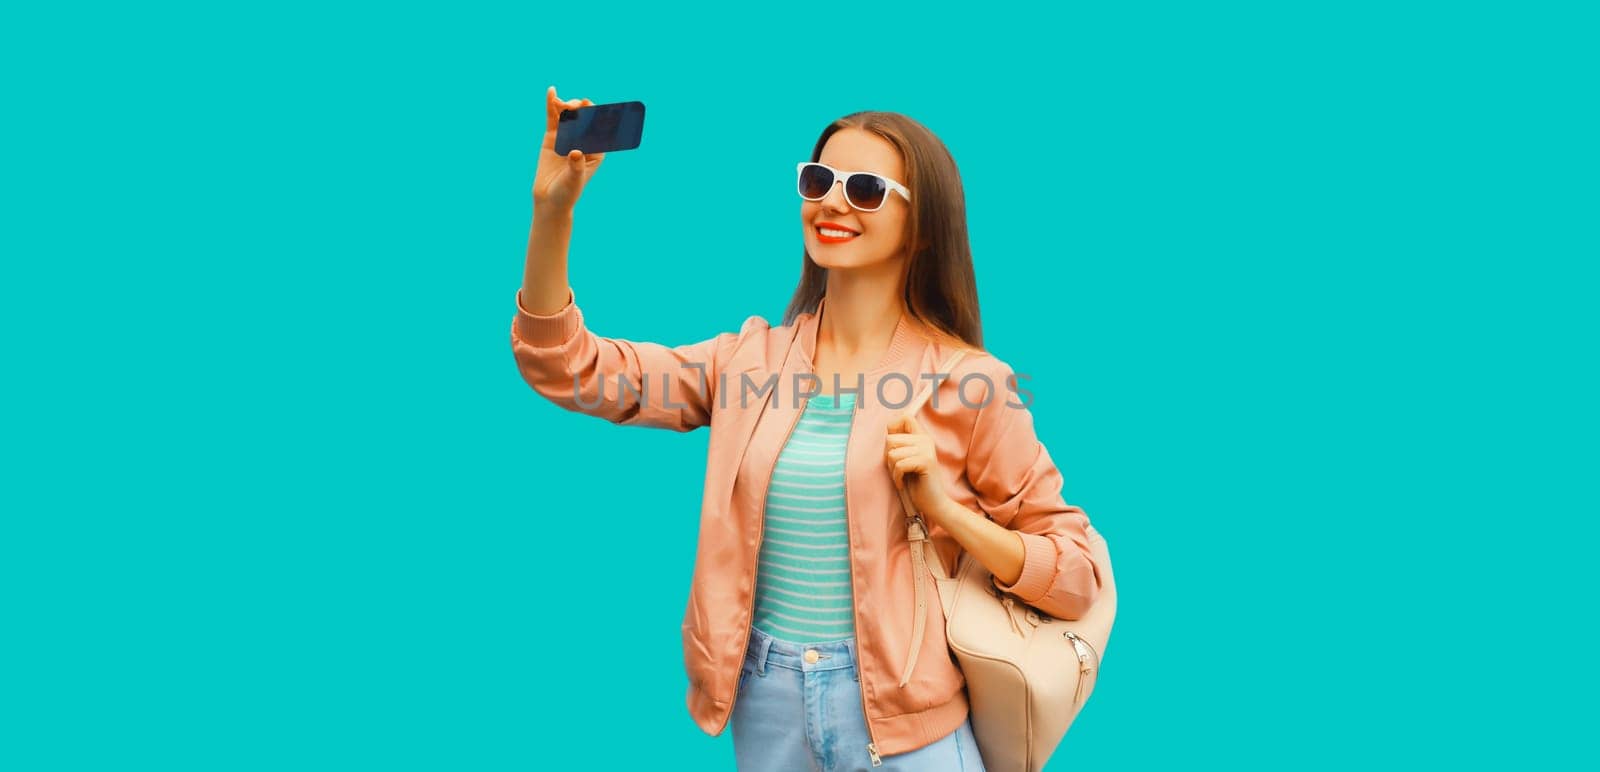 Portrait of happy smiling young woman taking selfie with smartphone wearing backpack on blue background